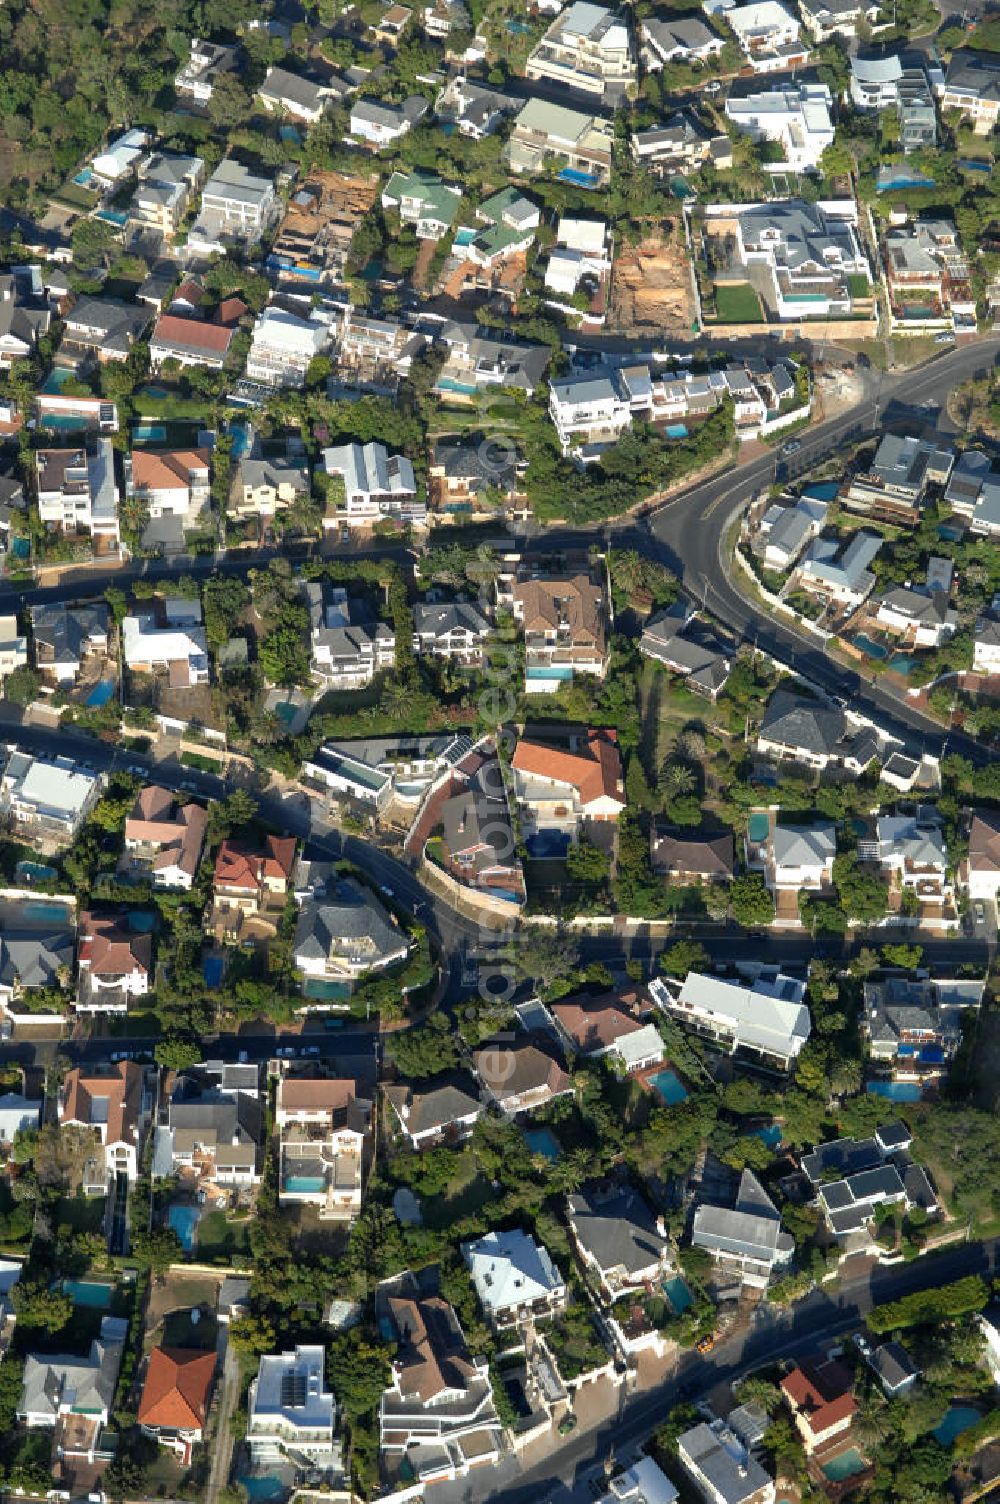 Aerial photograph Kapstadt - CAPE TOWN 17.02.2011 View of the district of Camps Bay in Cape Town, South Africa